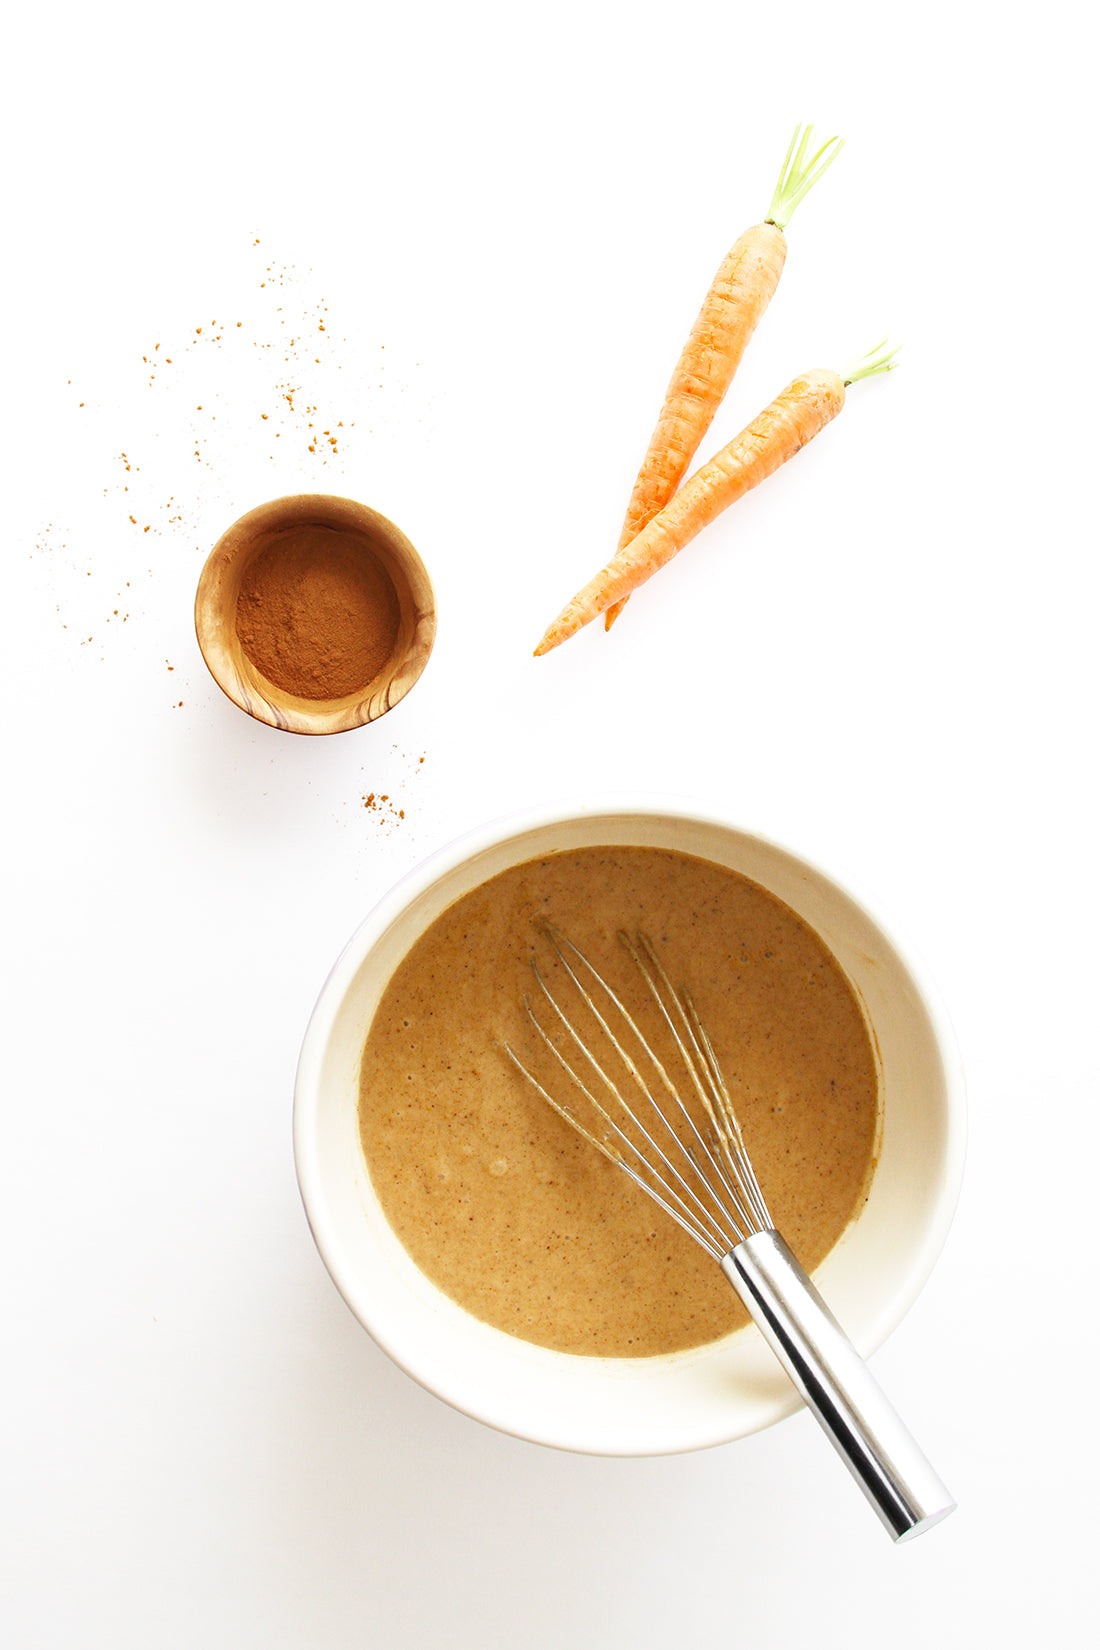 Image of a bowl of Miss Jones Baking Co Carrot Spice Cake batter next to two carrots and spice